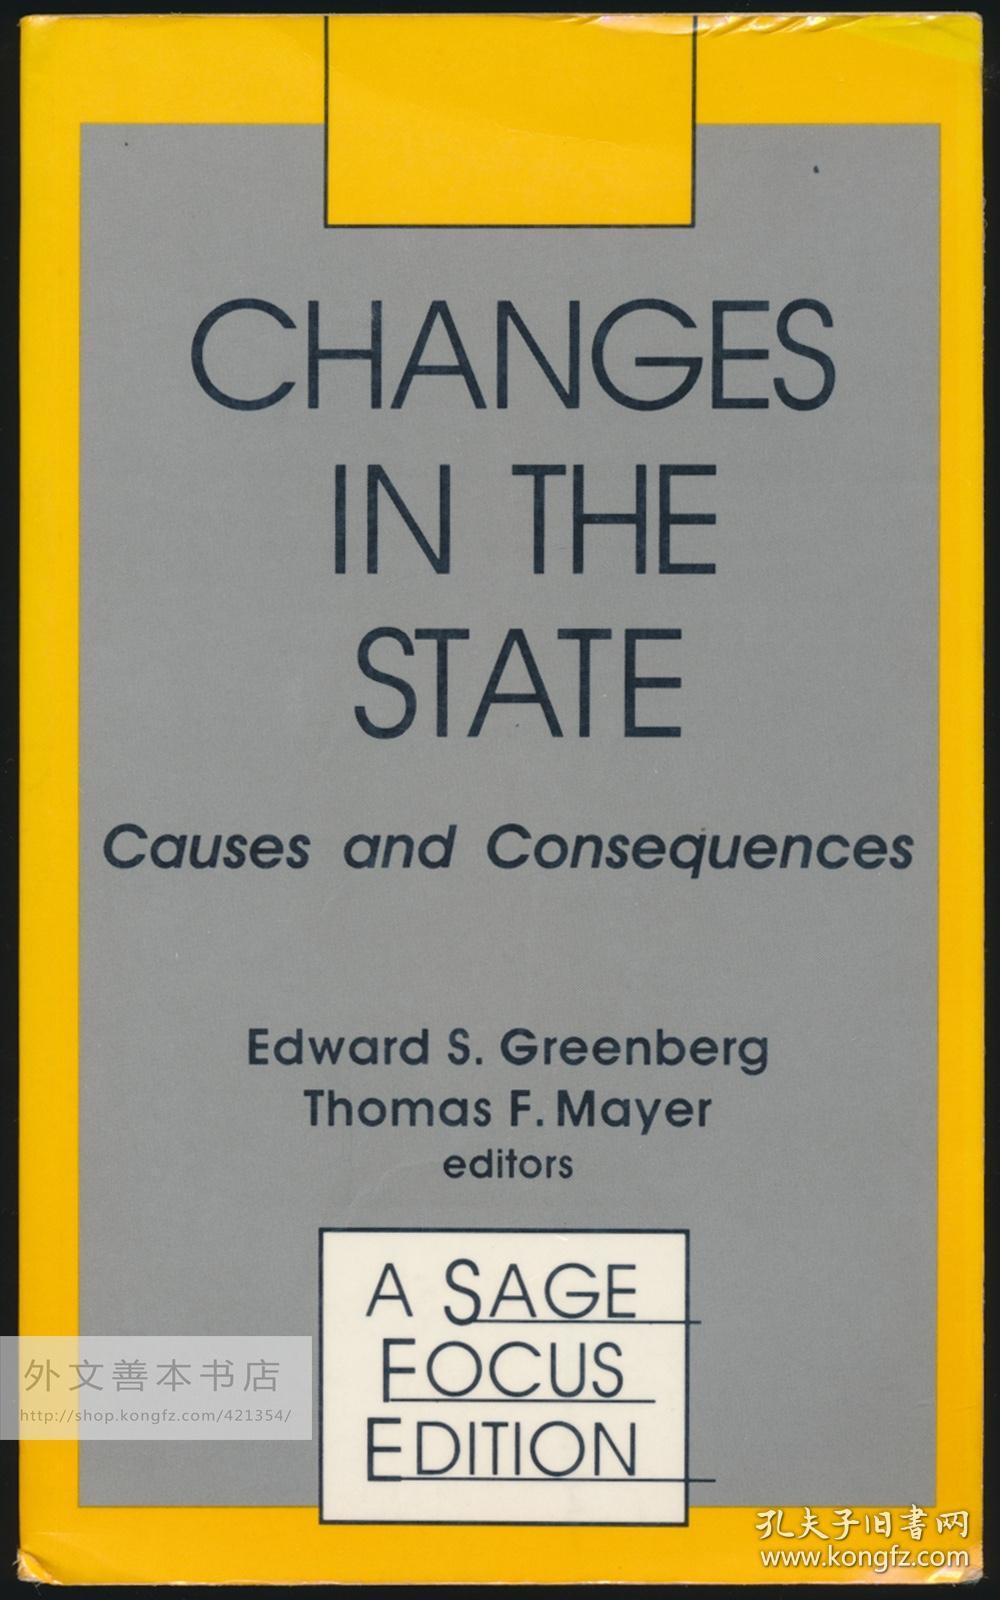 Changes in the State: Causes and Consequences 英文原版-《国家的变化：原因和结果》